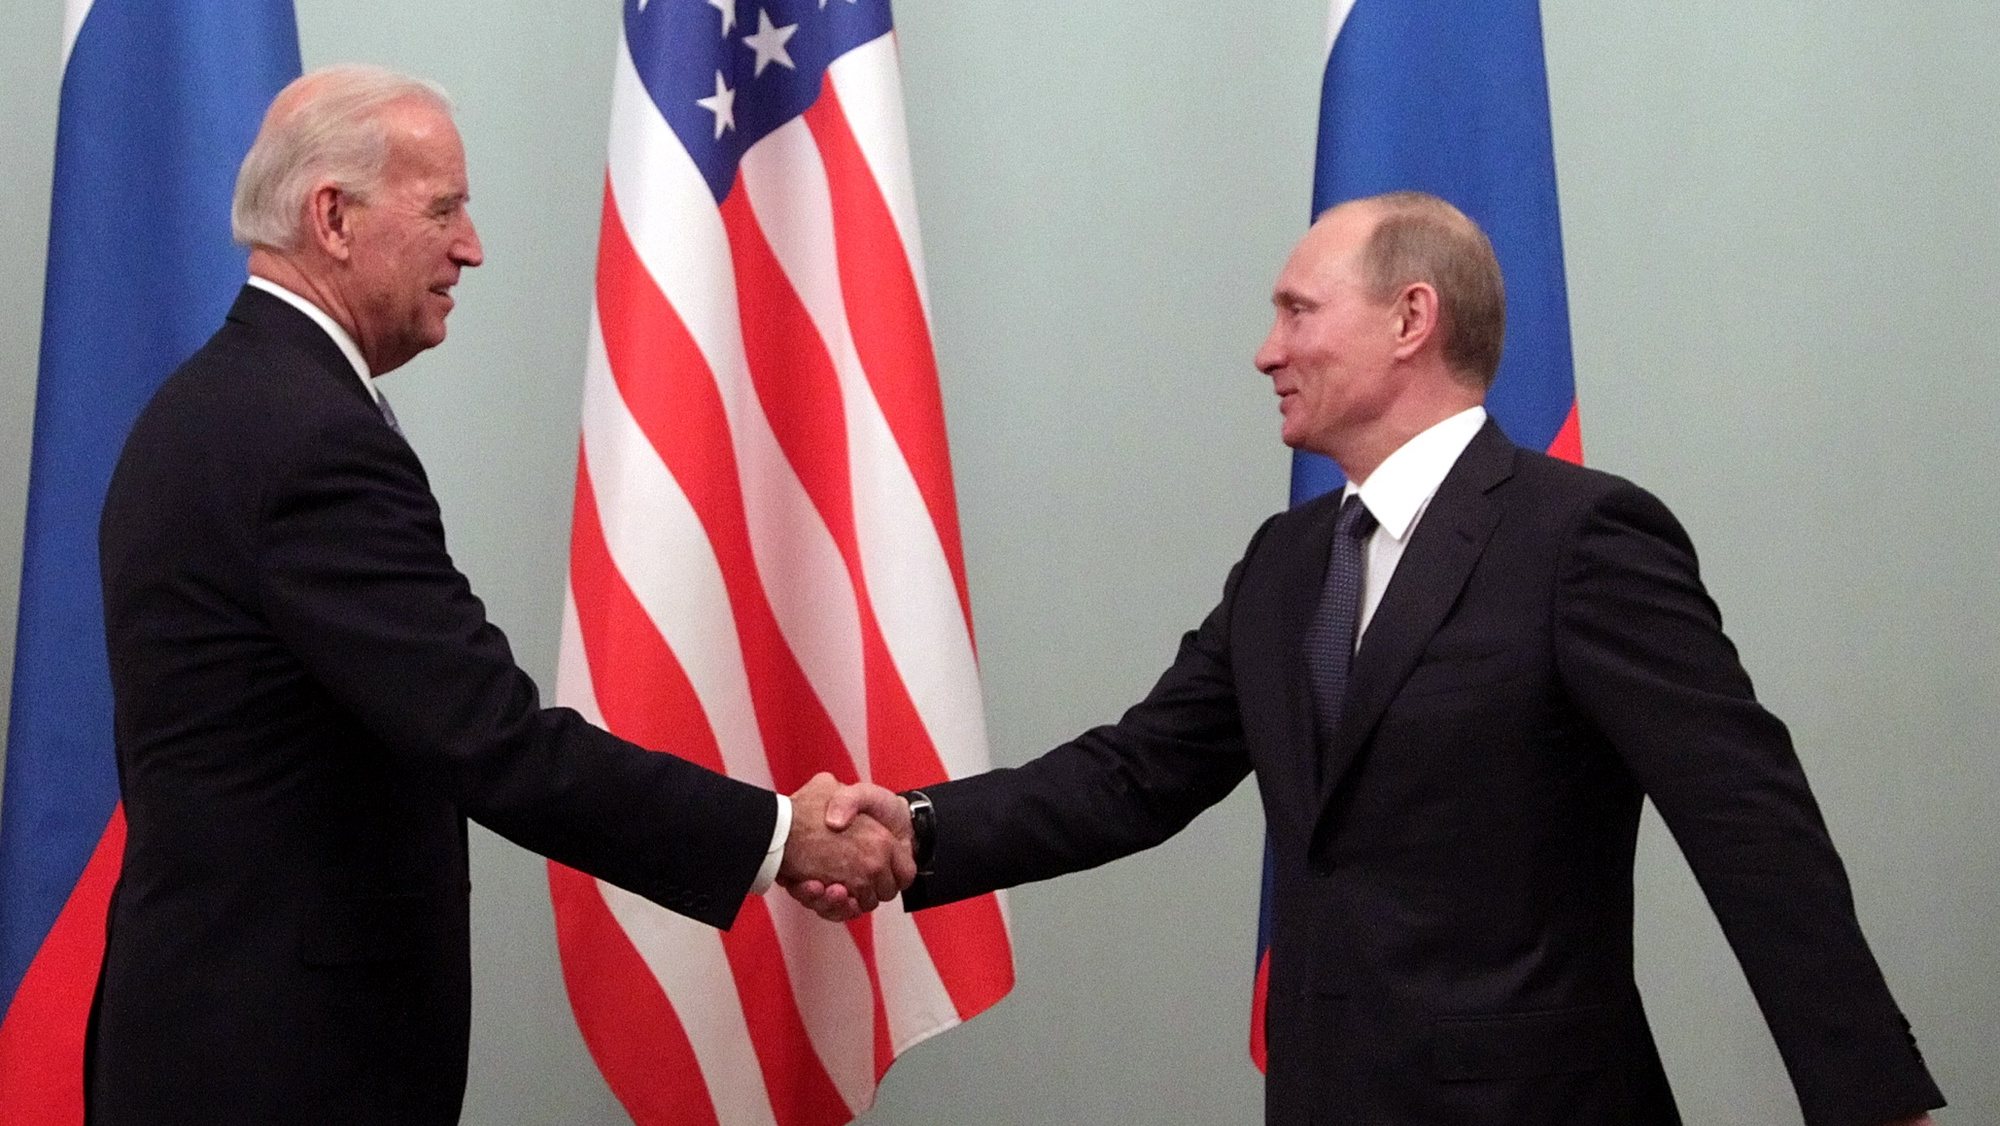 epa08884610 Then US Vice President Joe Biden (L) shakes hands with then Russian Prime Minister Vladimir Putin during their meeting in Moscow, Russia, 10 March 2011 (reissued 15 December 2020). Russian President Vladimir Putin congratulated Joe Biden for his victory in the US presidential election in a telegram published on the Kremlin&#039;s website on 15 December 2020.  EPA/MAXIM SHIPENKOV